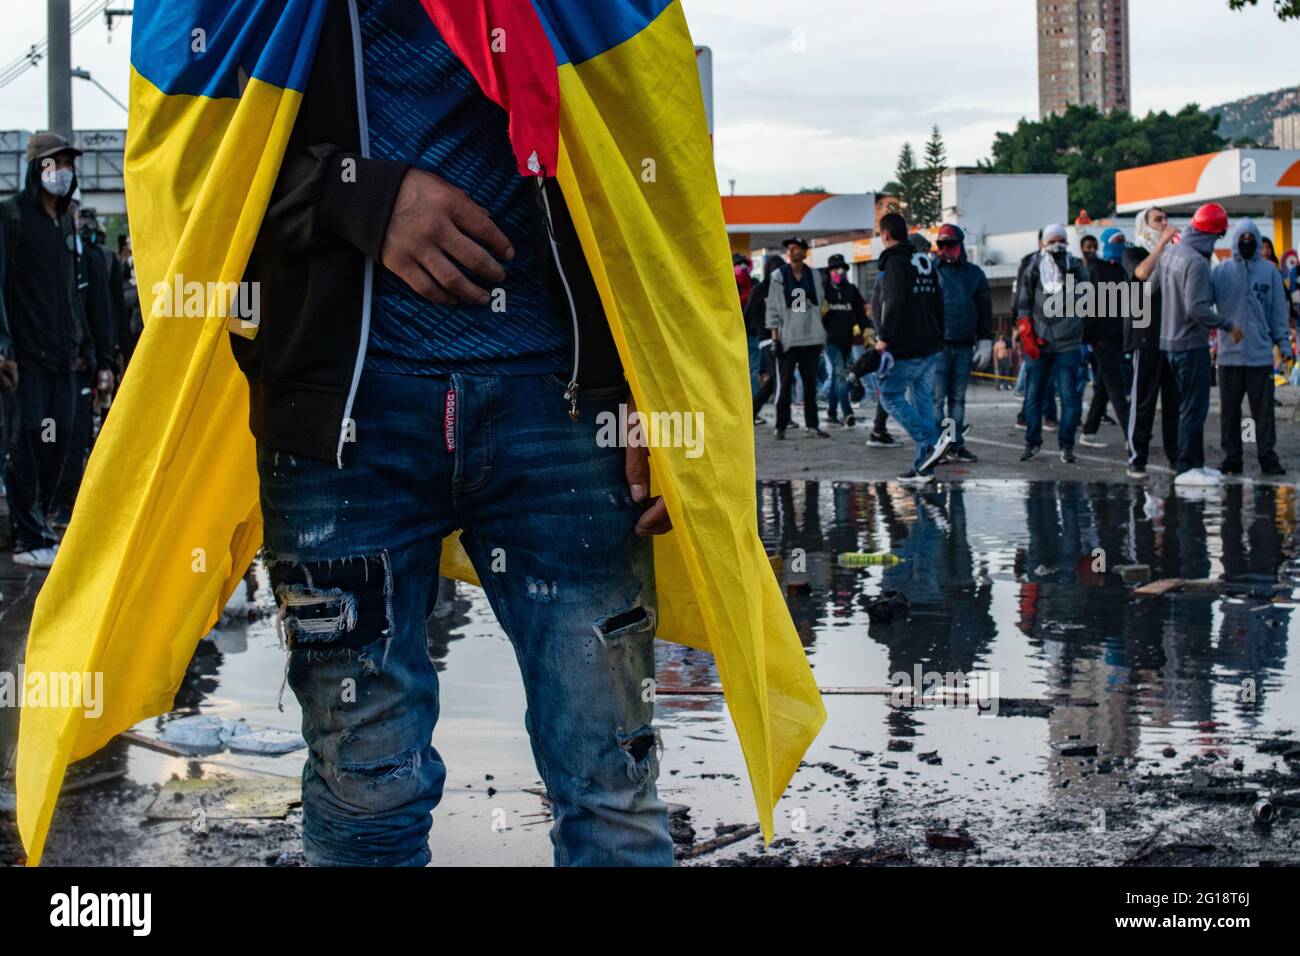 A member of the front line with a Colombian flag as clashes between demonstrators and Colombia's riot police (ESMAD) erupt in Medellín, Colombia after several weeks of anti-government protest against President Ivan Duque's tax and health reforms and unrest and abuse of authority cases that leave at least 70 dead according to NGOs on June 4, 2021. Stock Photo